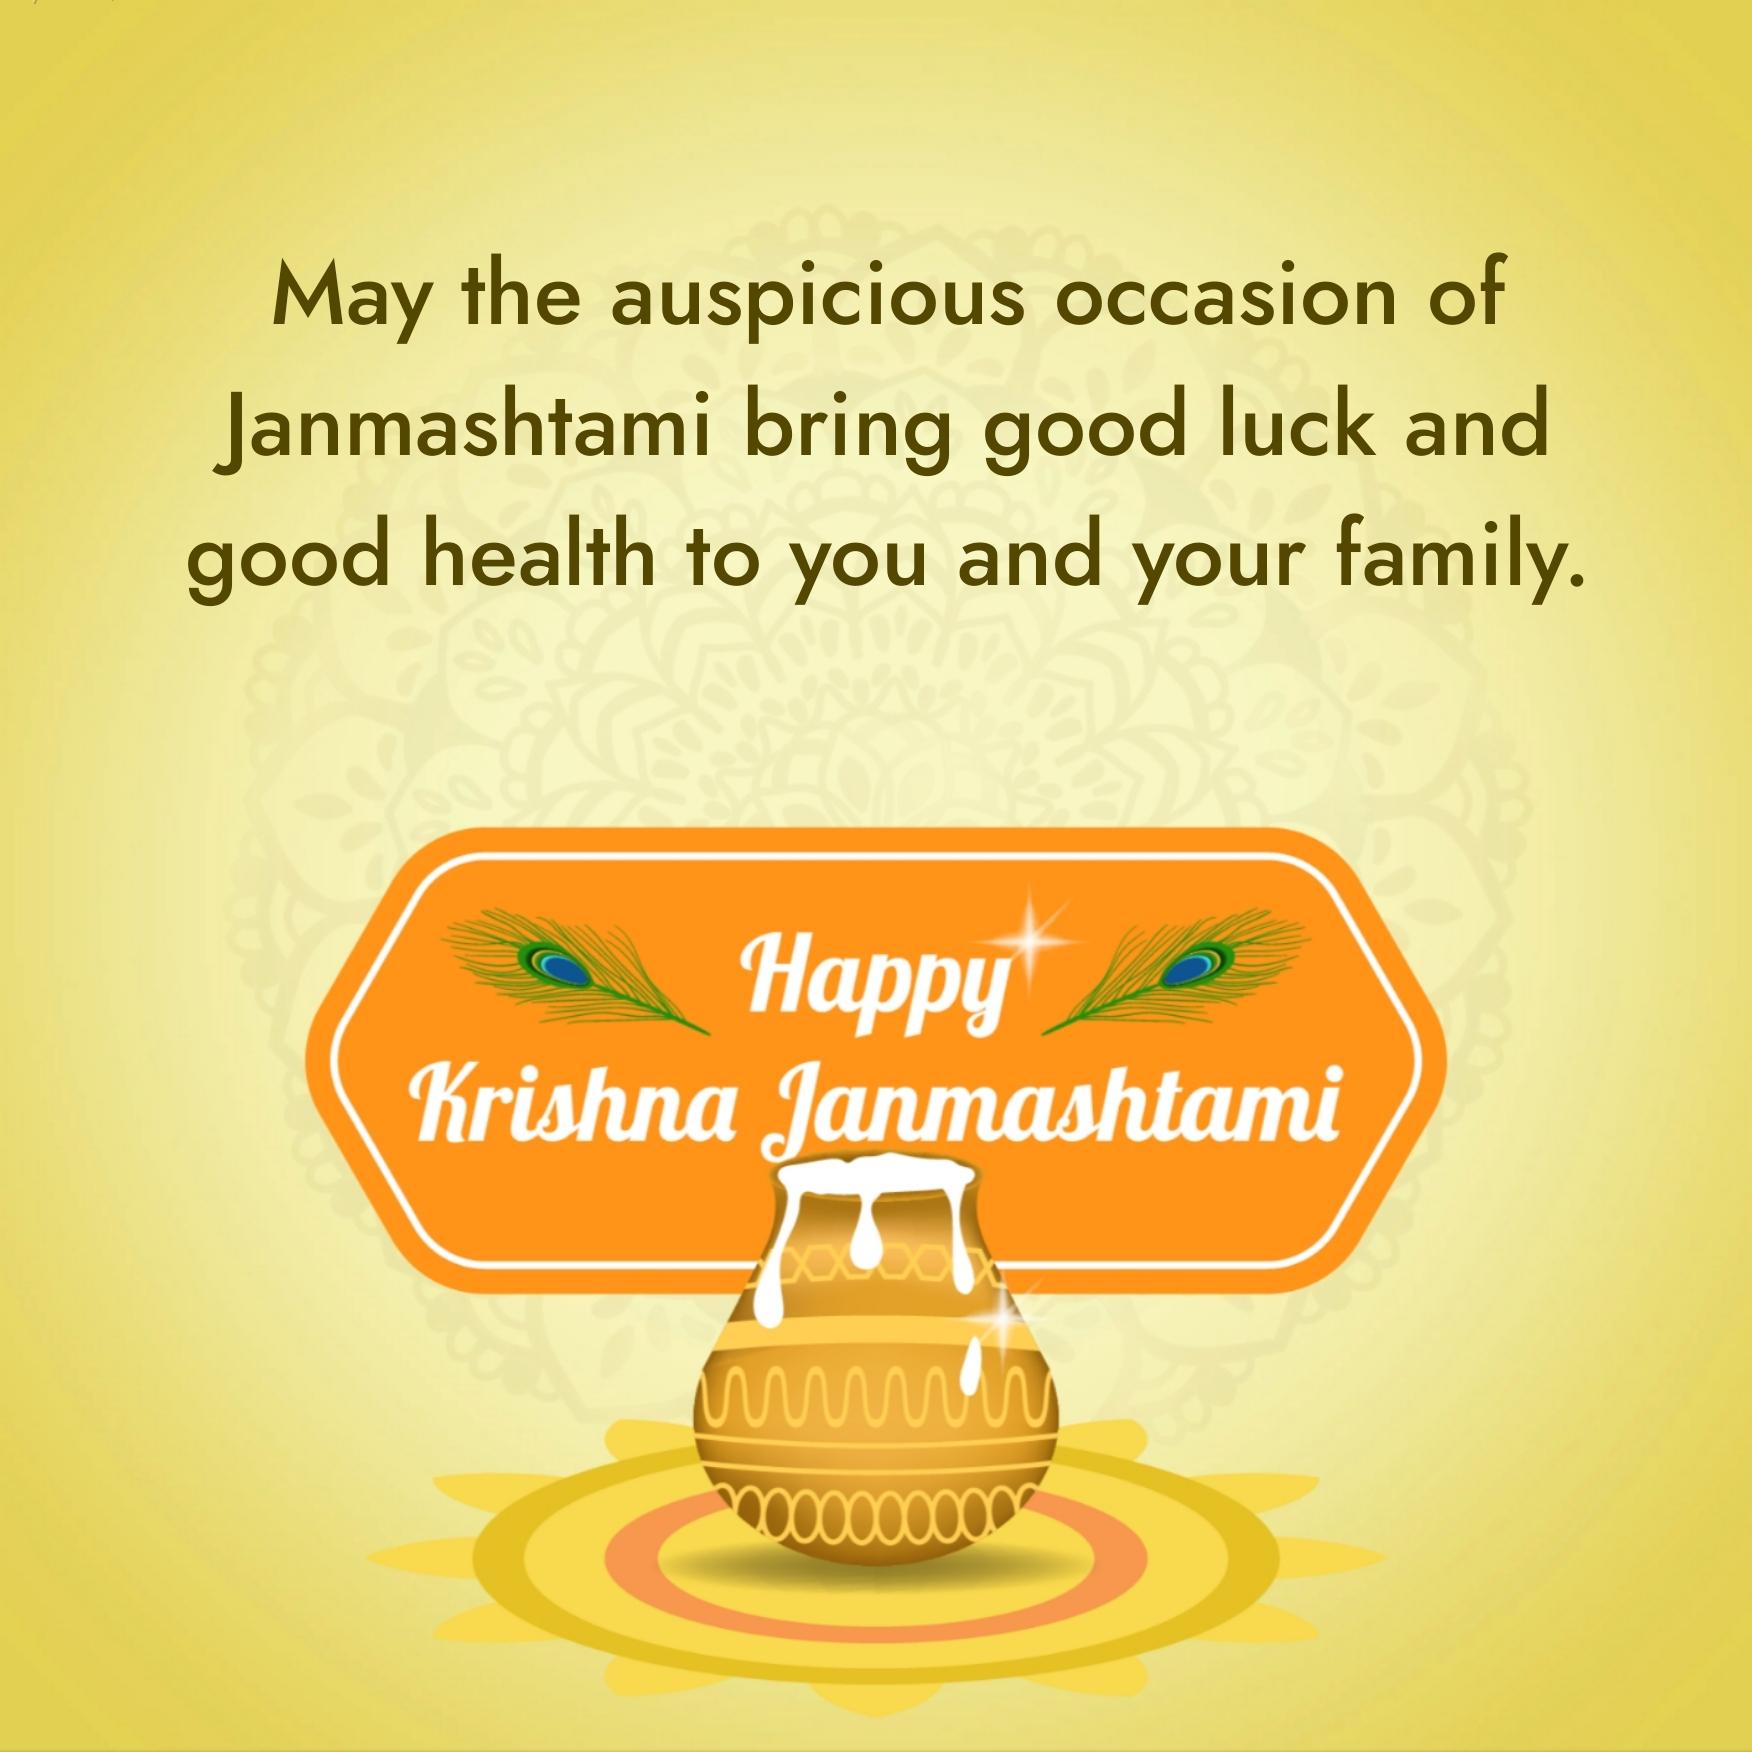 May the auspicious occasion of Janmashtami bring good luck